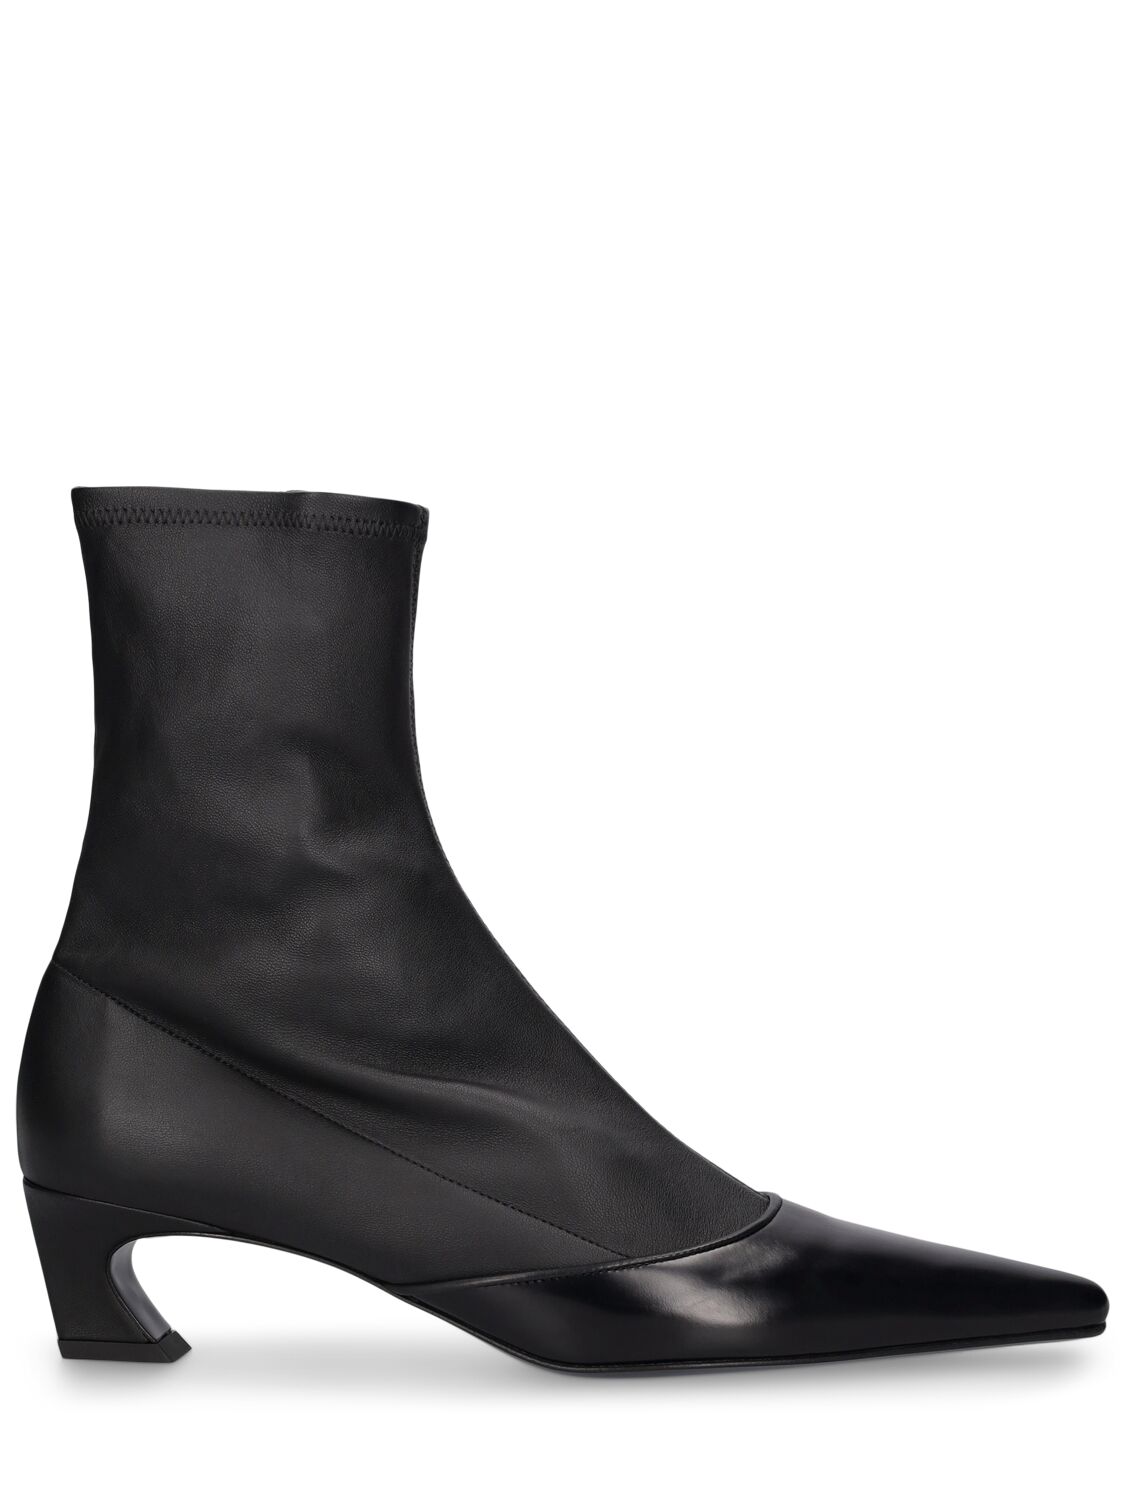 Acne Studios 45mm Bano Leather Ankle Boots In Black